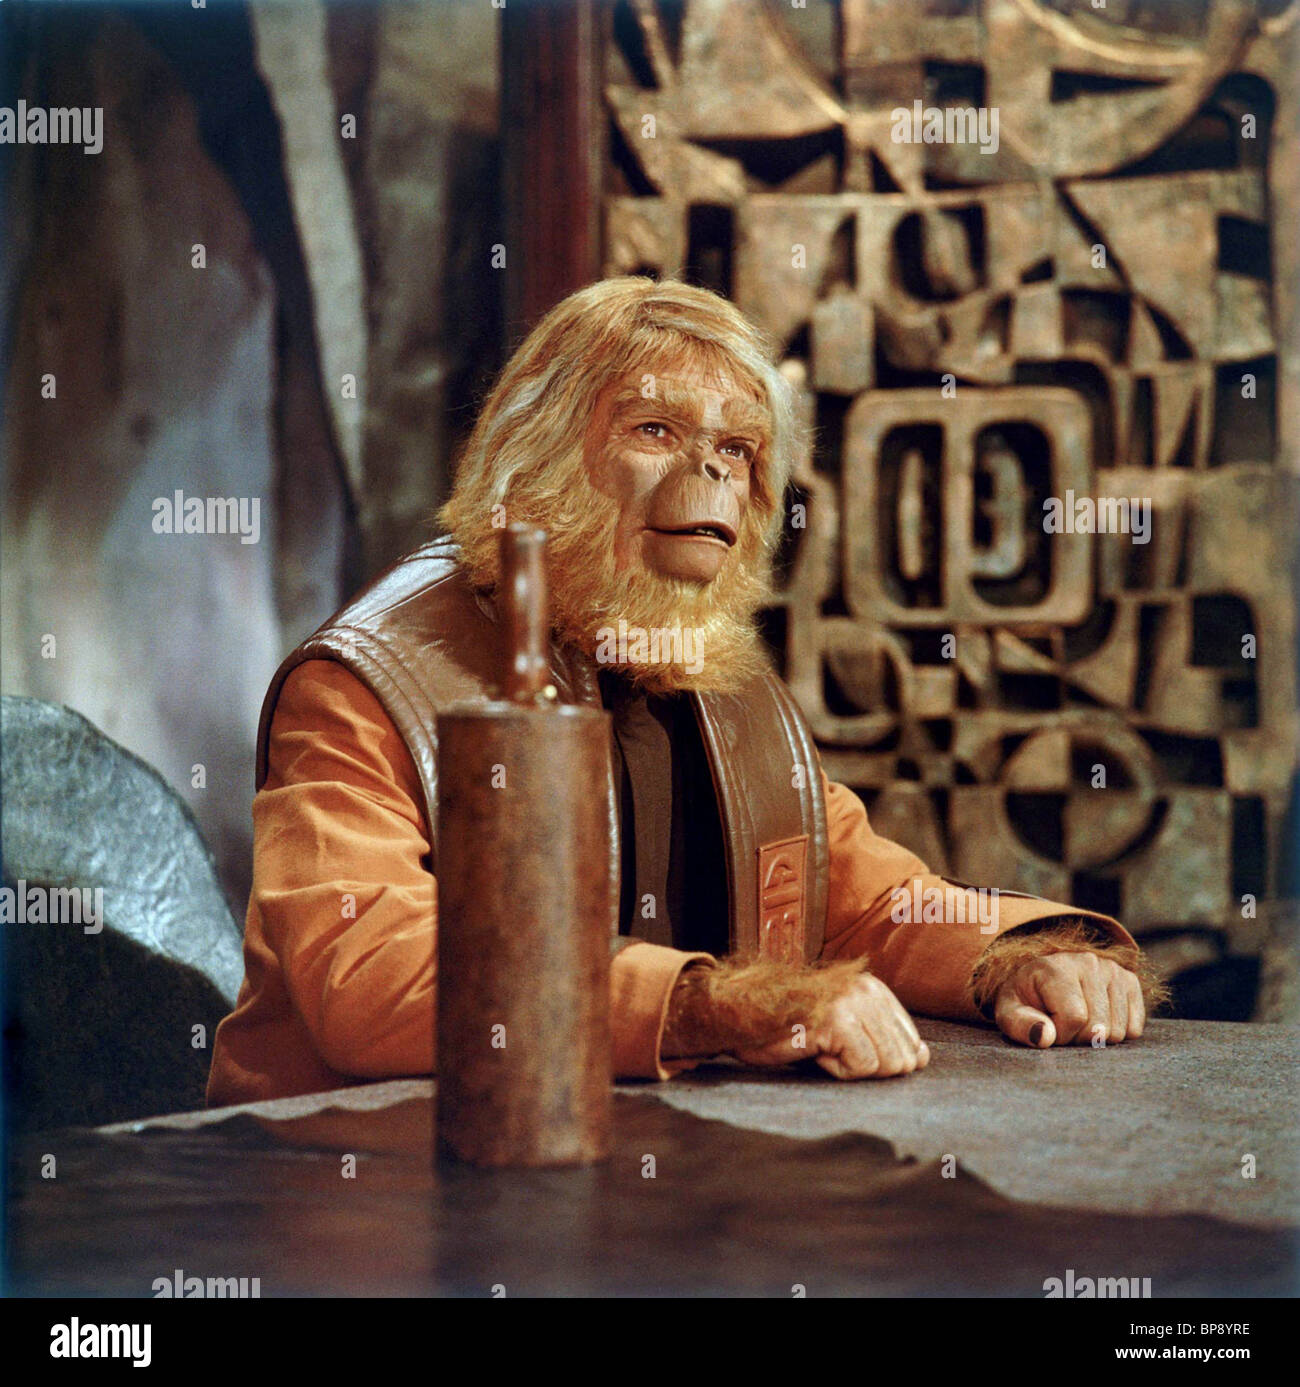 MAURICE EVANS PLANET OF THE APES (1968 Stock Photo ...